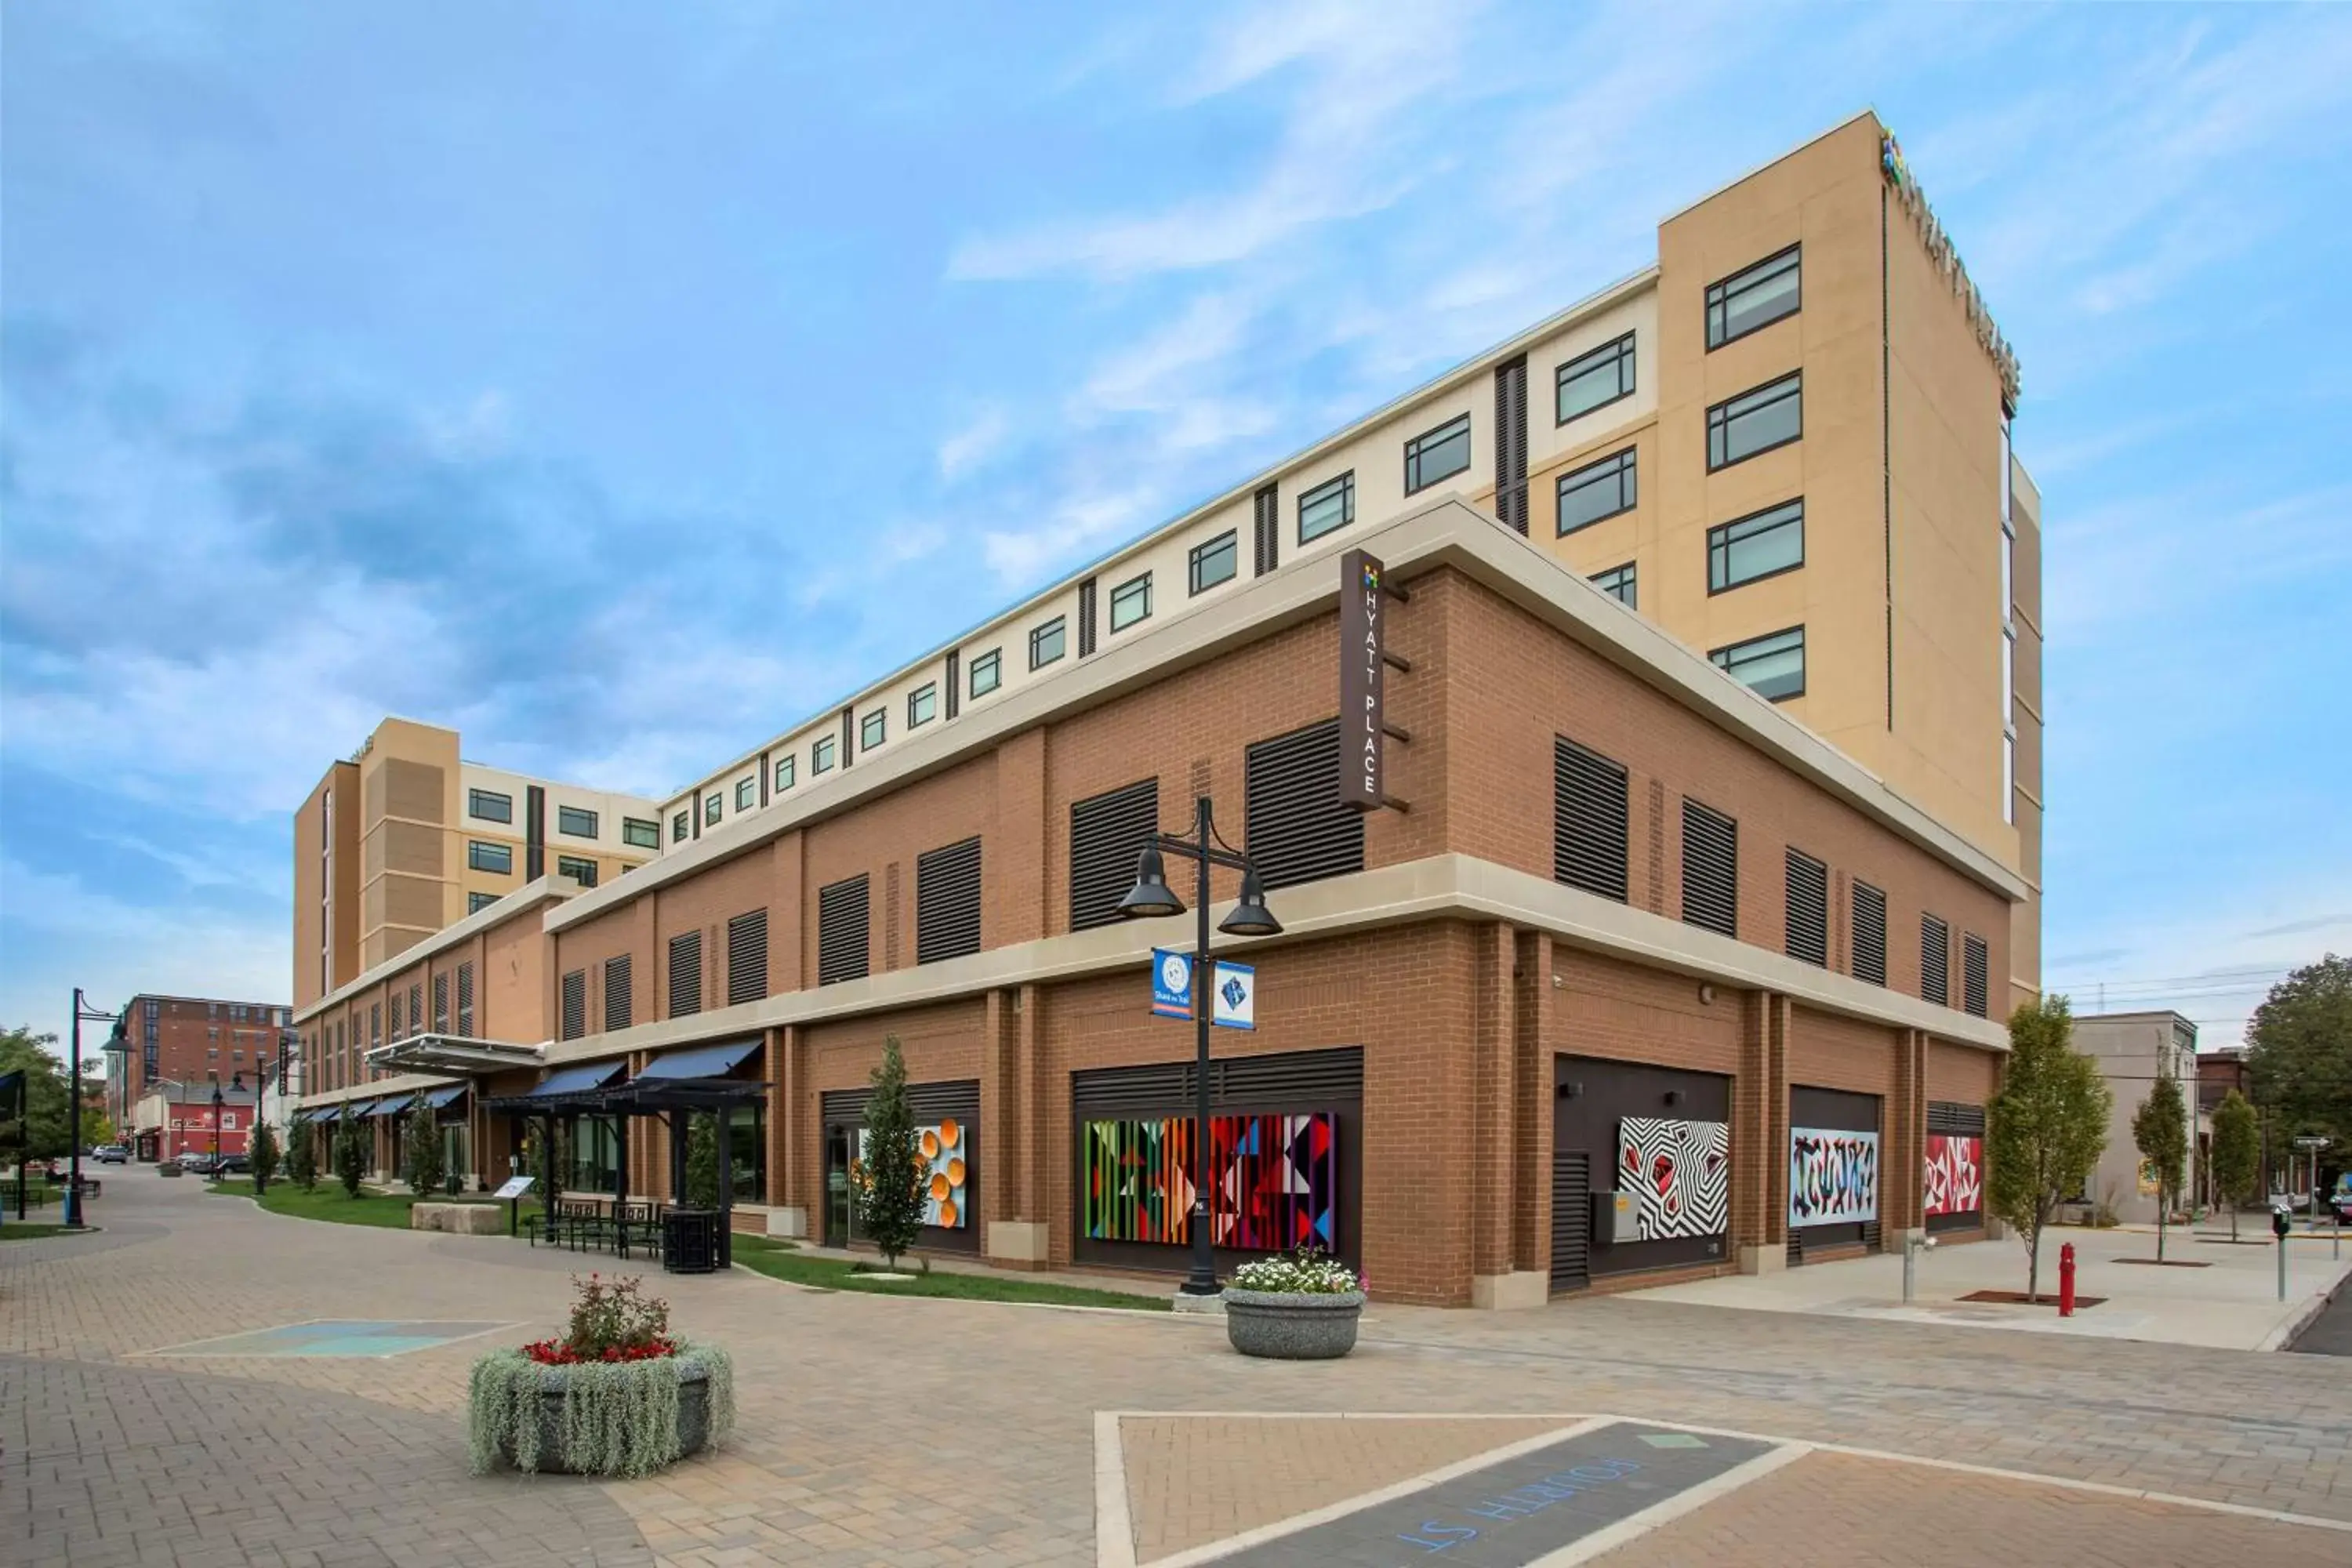 Property Building in Hyatt Place Bloomington Indiana